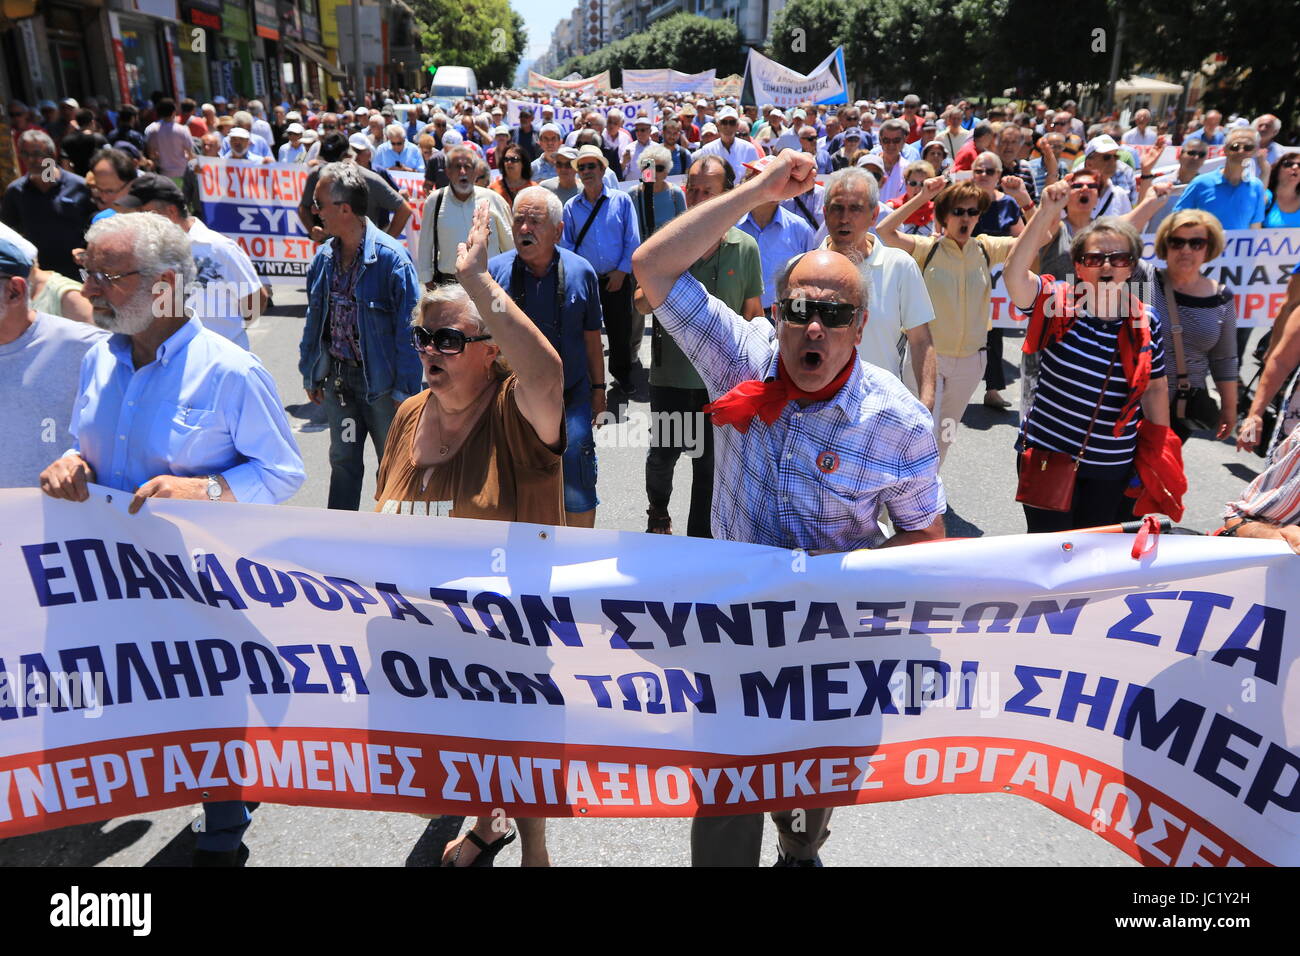 Thessaloniki, Greece, June 13th, 2017. Thousands of elderly Greeks took to the streets and protested against cuts to their pensions.  Many retirees in Greece have already seen their pensions cut several times.  Pension cuts and reforms has been a regular feature of Greece's austerity drives. Credit : Orhan Tsolak / Alamy Live News Stock Photo